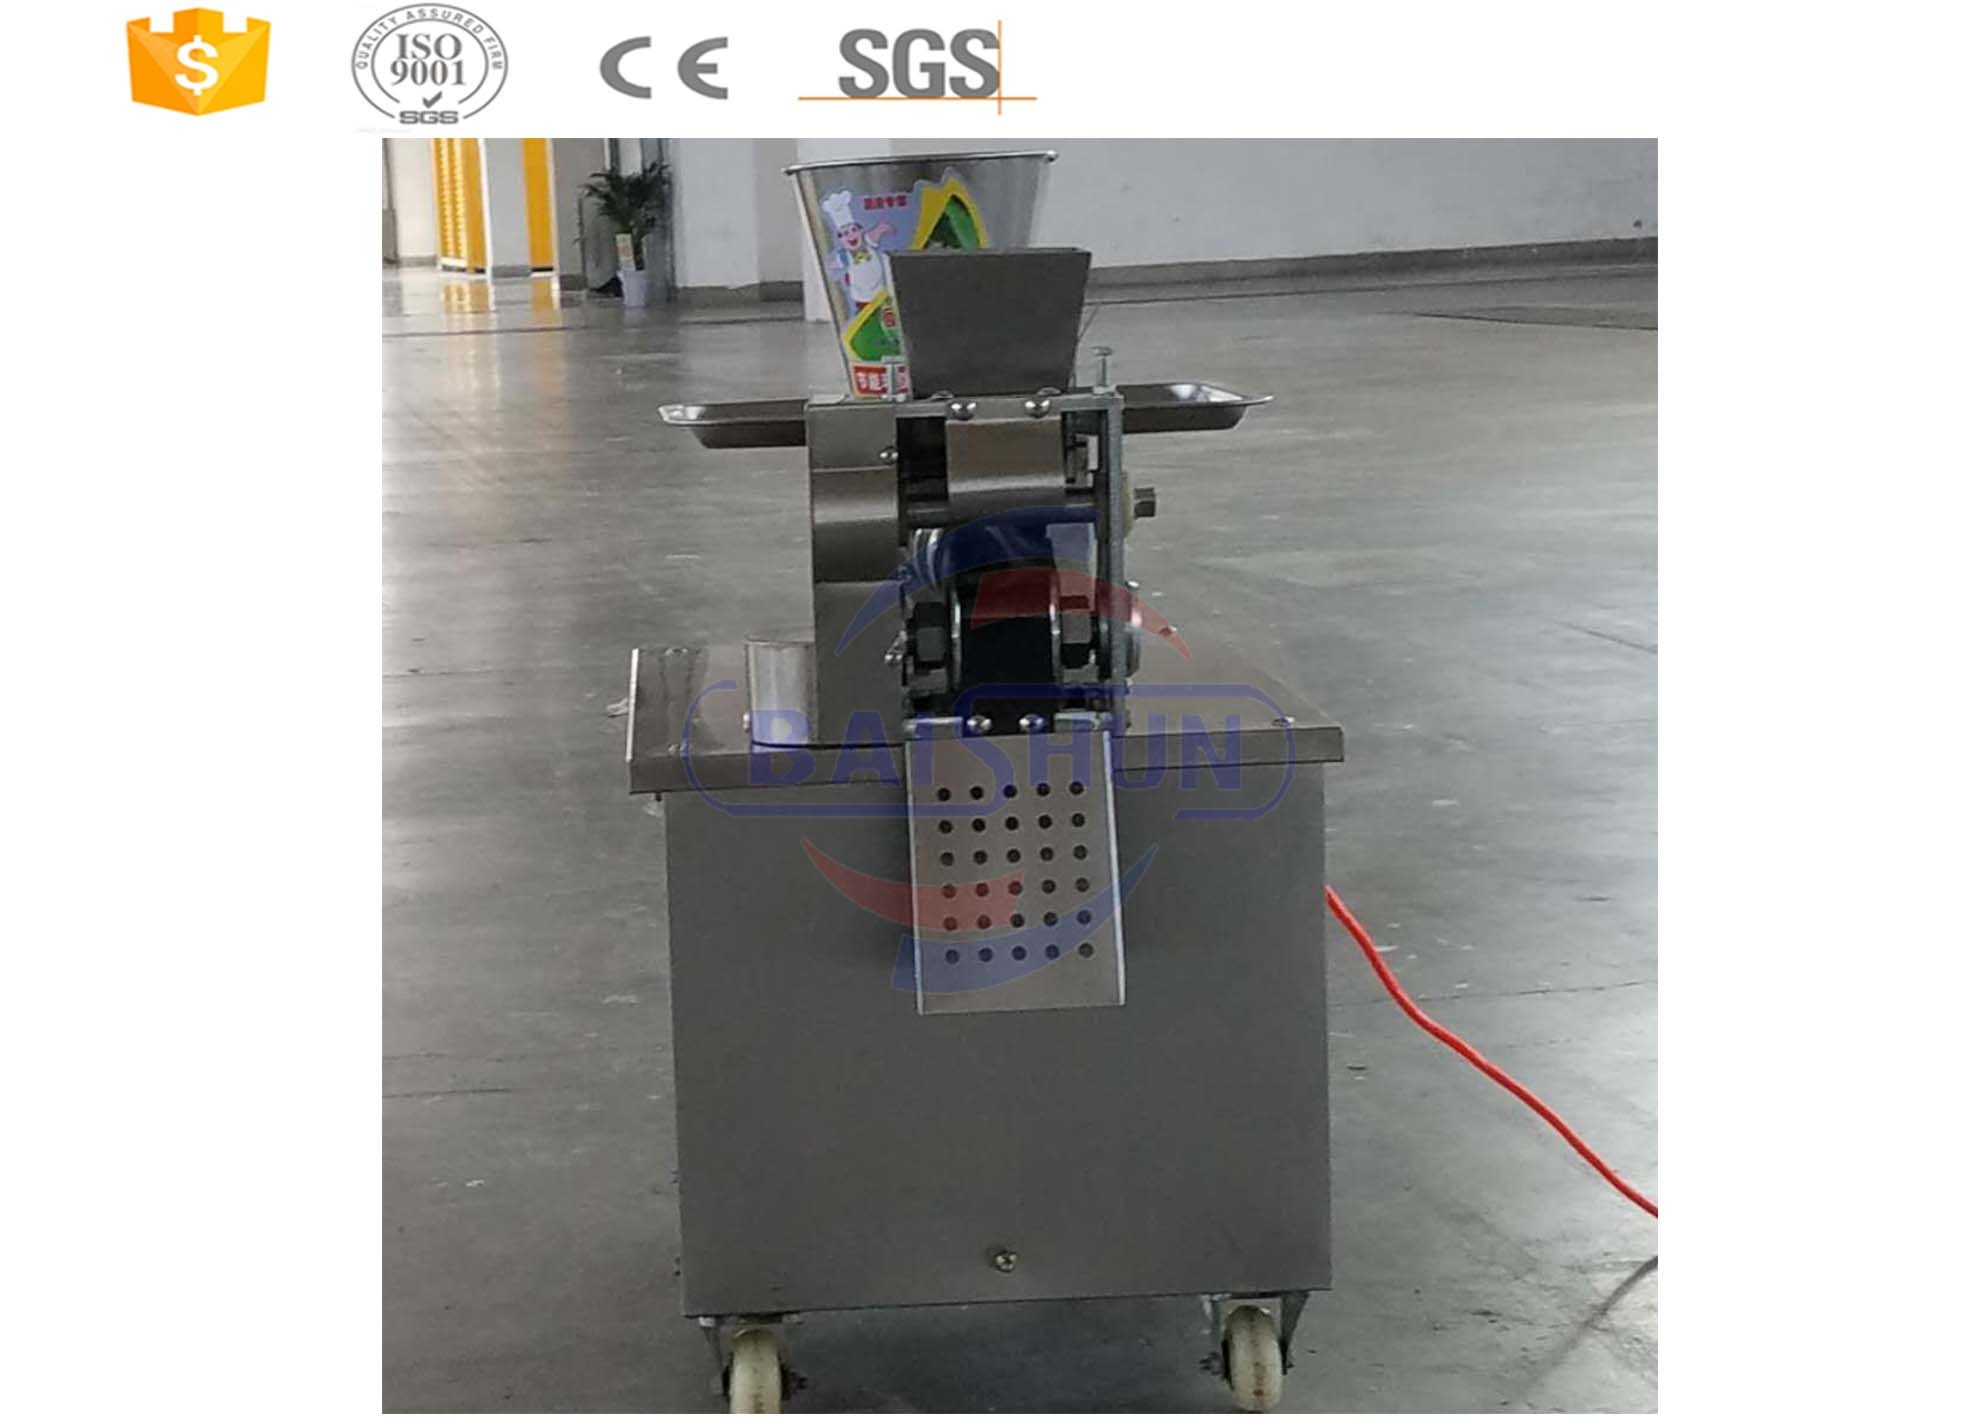  Compact Industrial Food Machinery Automatic Dumpling / Samosa Making Machine Manufactures